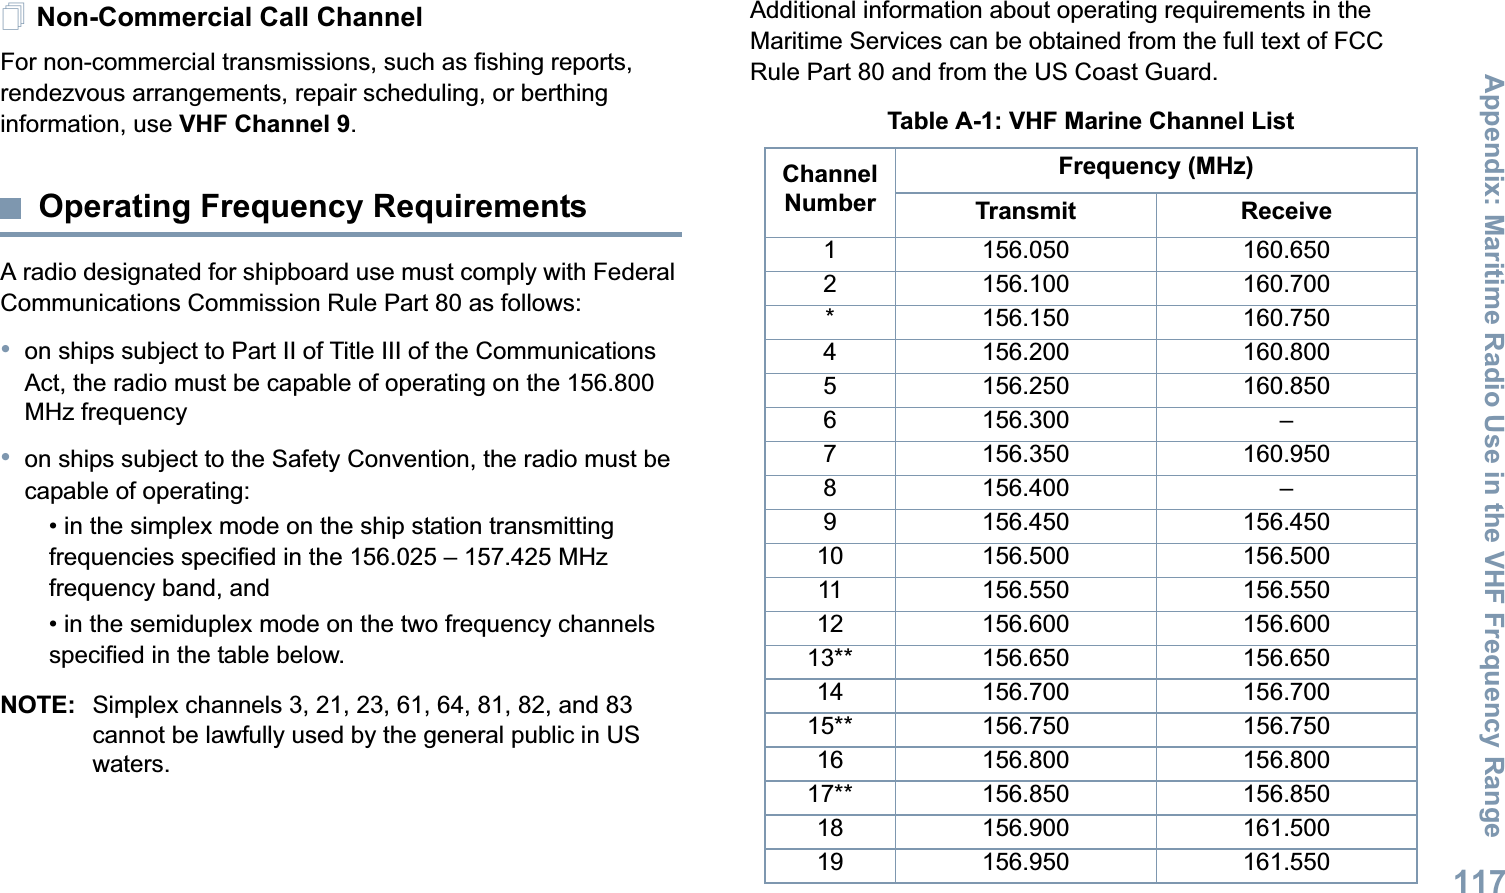 Appendix: Maritime Radio Use in the VHF Frequency RangeEnglish117Non-Commercial Call ChannelFor non-commercial transmissions, such as fishing reports, rendezvous arrangements, repair scheduling, or berthing information, use VHF Channel 9.Operating Frequency RequirementsA radio designated for shipboard use must comply with Federal Communications Commission Rule Part 80 as follows:•on ships subject to Part II of Title III of the Communications Act, the radio must be capable of operating on the 156.800 MHz frequency•on ships subject to the Safety Convention, the radio must be capable of operating:• in the simplex mode on the ship station transmitting frequencies specified in the 156.025 – 157.425 MHz frequency band, and• in the semiduplex mode on the two frequency channels specified in the table below.NOTE: Simplex channels 3, 21, 23, 61, 64, 81, 82, and 83 cannot be lawfully used by the general public in US waters.Additional information about operating requirements in the Maritime Services can be obtained from the full text of FCC Rule Part 80 and from the US Coast Guard.Table A-1: VHF Marine Channel ListChannel NumberFrequency (MHz)Transmit Receive1 156.050 160.6502 156.100 160.700* 156.150 160.7504 156.200 160.8005 156.250 160.8506 156.300 –7 156.350 160.9508 156.400 –9 156.450 156.45010 156.500 156.50011 156.550 156.55012 156.600 156.60013** 156.650 156.65014 156.700 156.70015** 156.750 156.75016 156.800 156.80017** 156.850 156.85018 156.900 161.50019 156.950 161.550